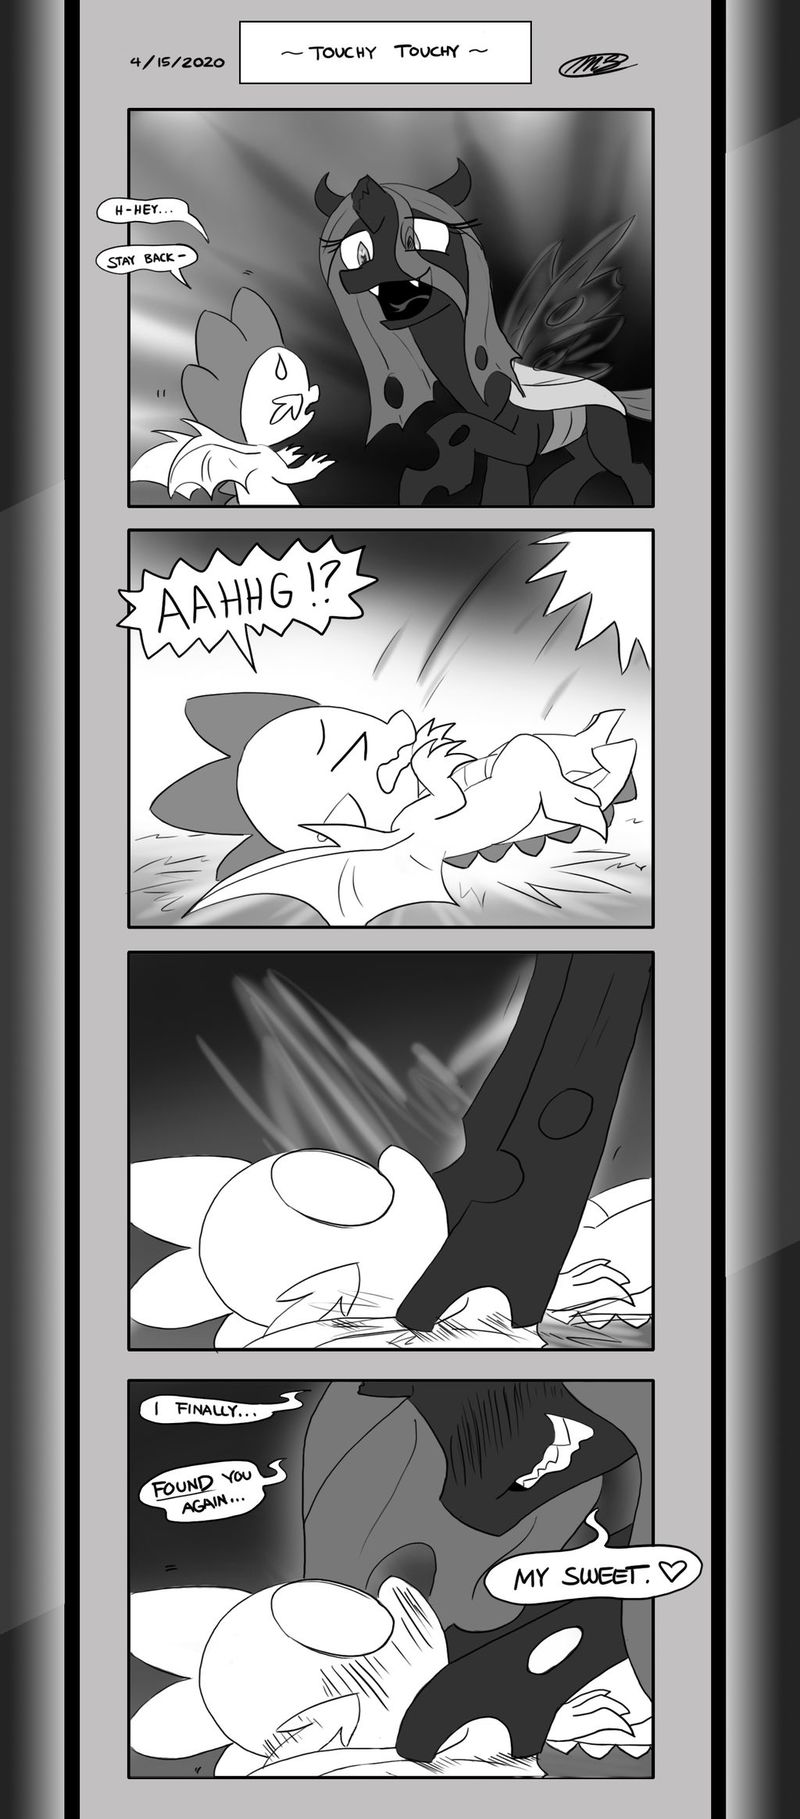 Page 6: Touchy Touchy